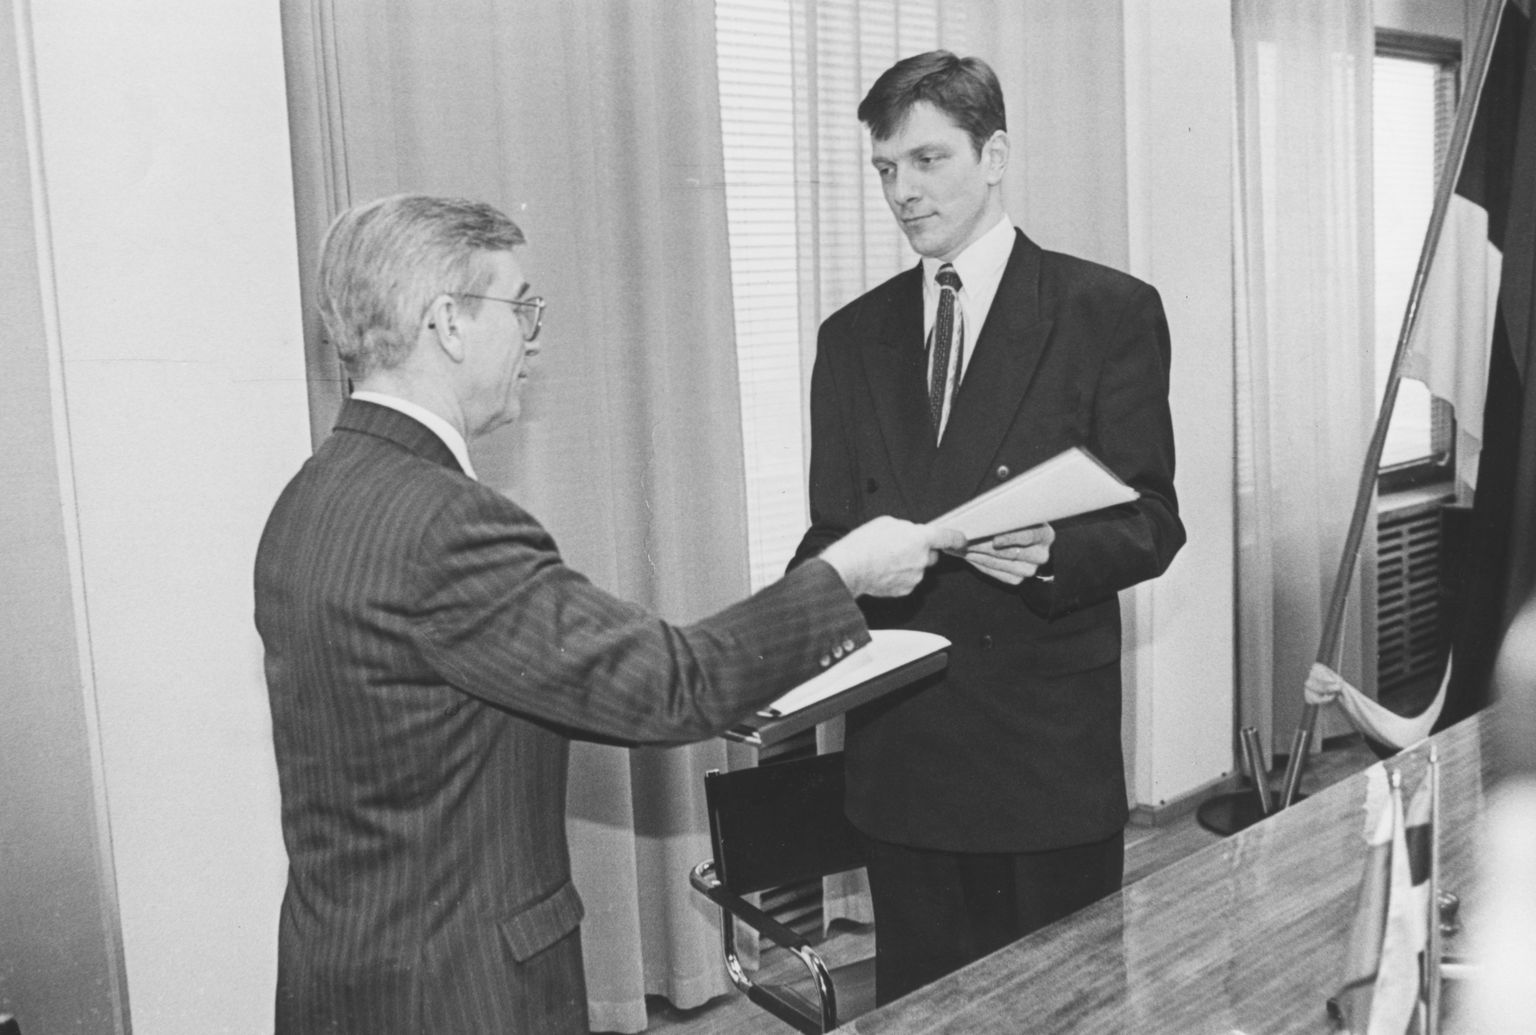 Chancellor of the Ministry of Foreign Affairs Indrek Tarand and Ambassador of Russia Aleksander Trofimov on 1995 at the ceremony of exchanging letters of ratification of the Agreement on Legal Aid between Estonia and the Russian Federation.